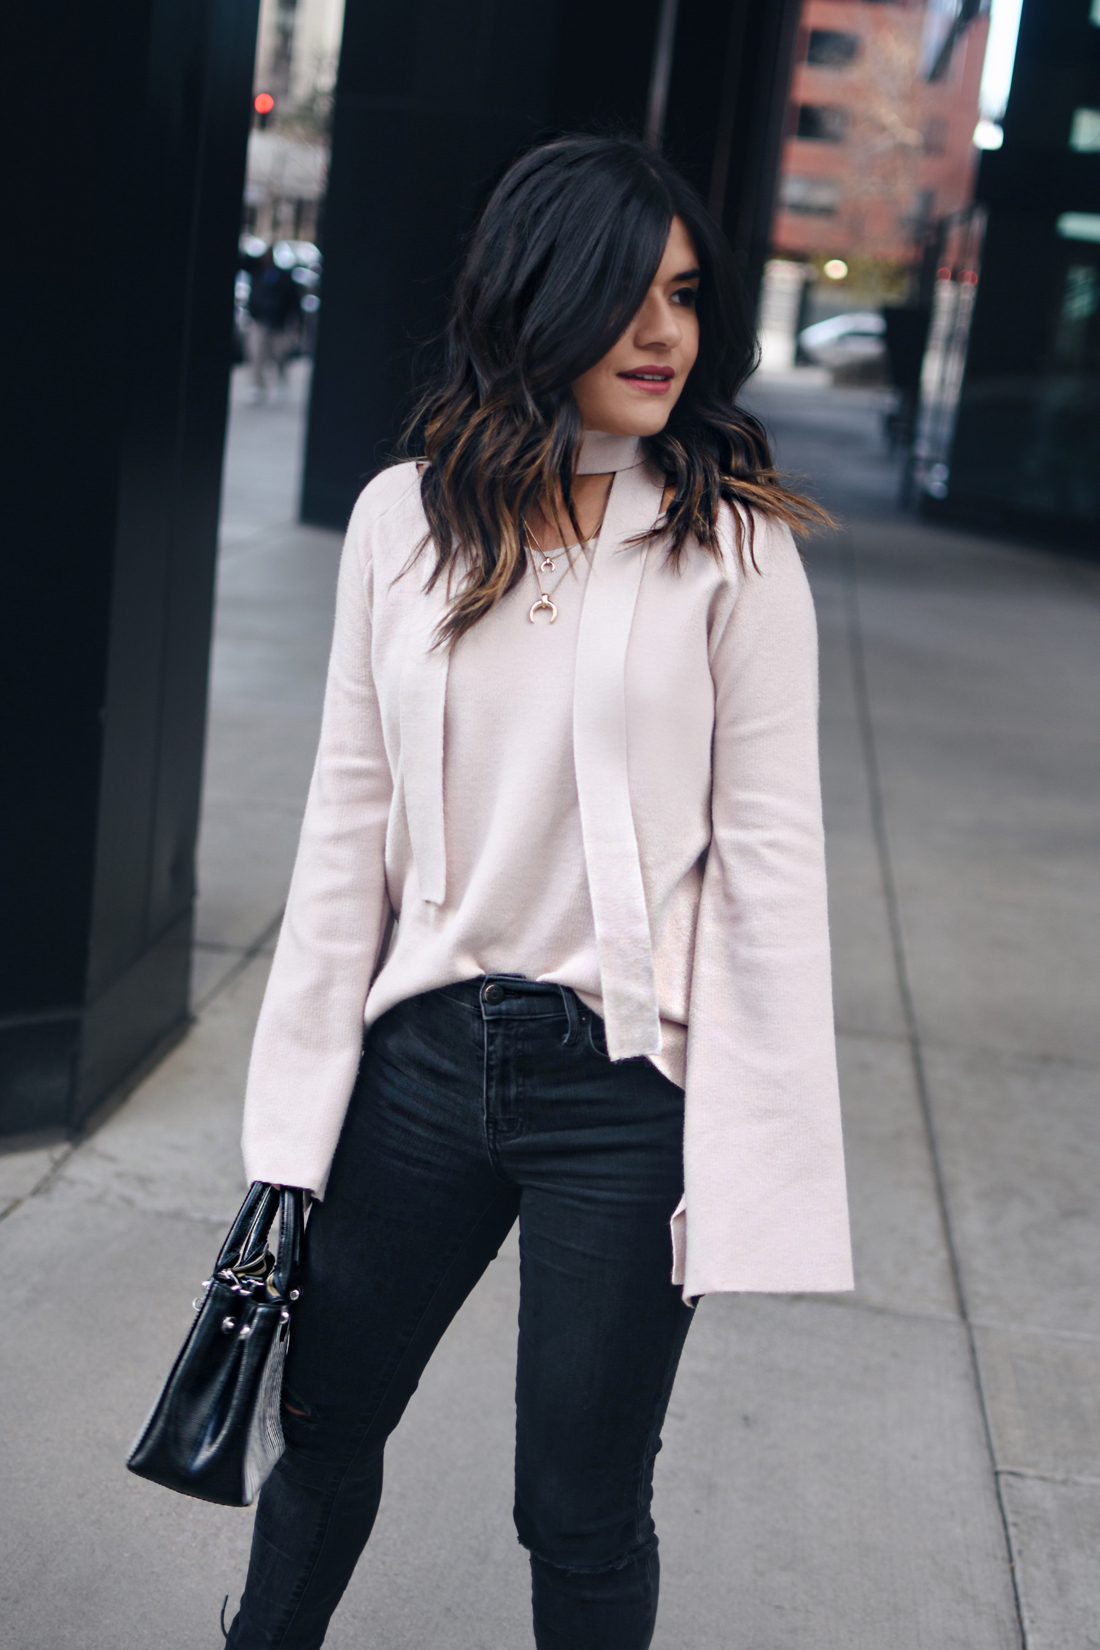 Carolina Hellal of Chic Talk wearing a Chicwish bell sleeve sweater, Madewell ripped jeans, Topshop leather jacket, and Public Desire sandals.